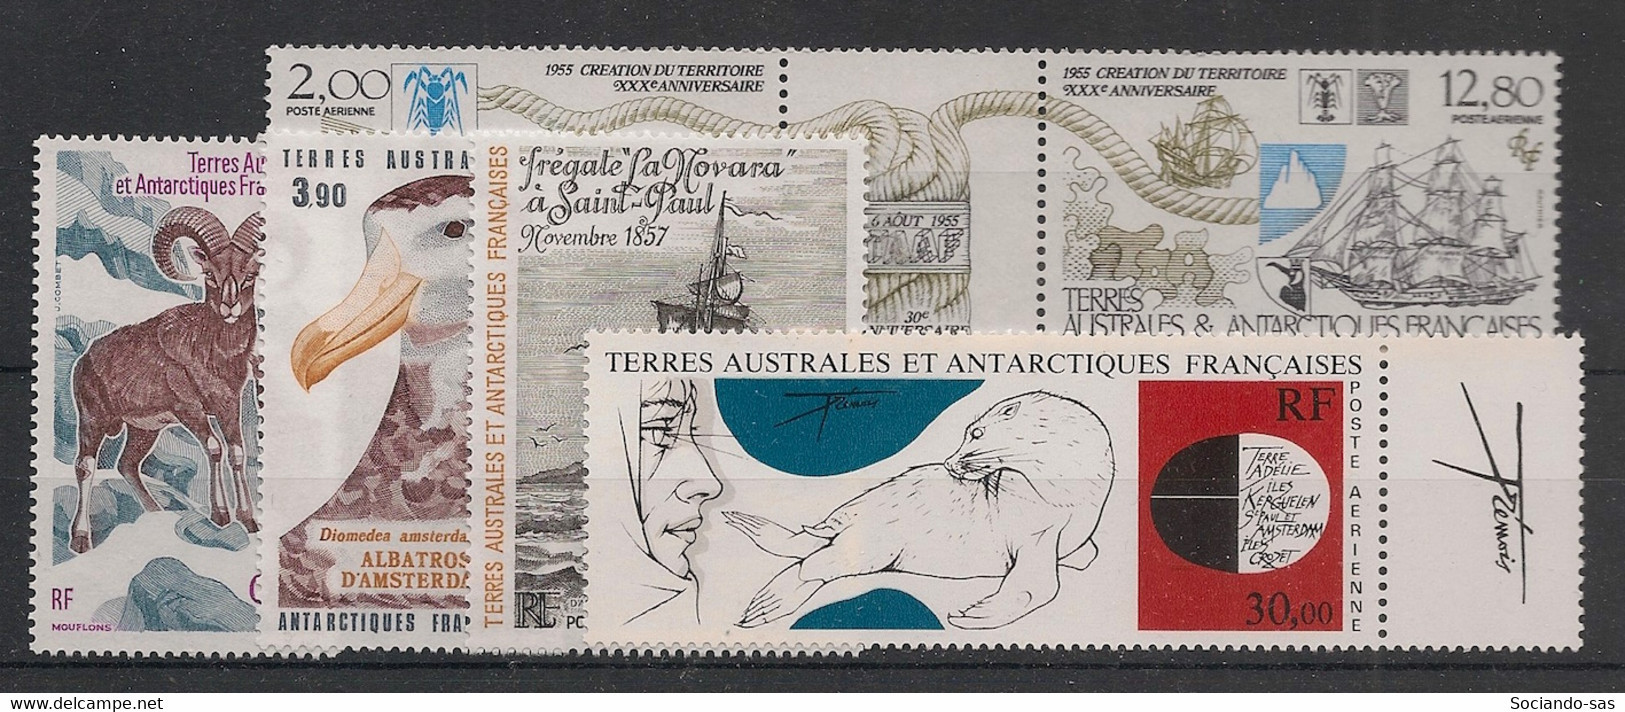 TAAF - Poste Aérienne PA - Année Complète 1985 - N°Yv. 86 à 91 - 6 Valeurs - Neuf Luxe ** / MNH / Postfrisch - Full Years